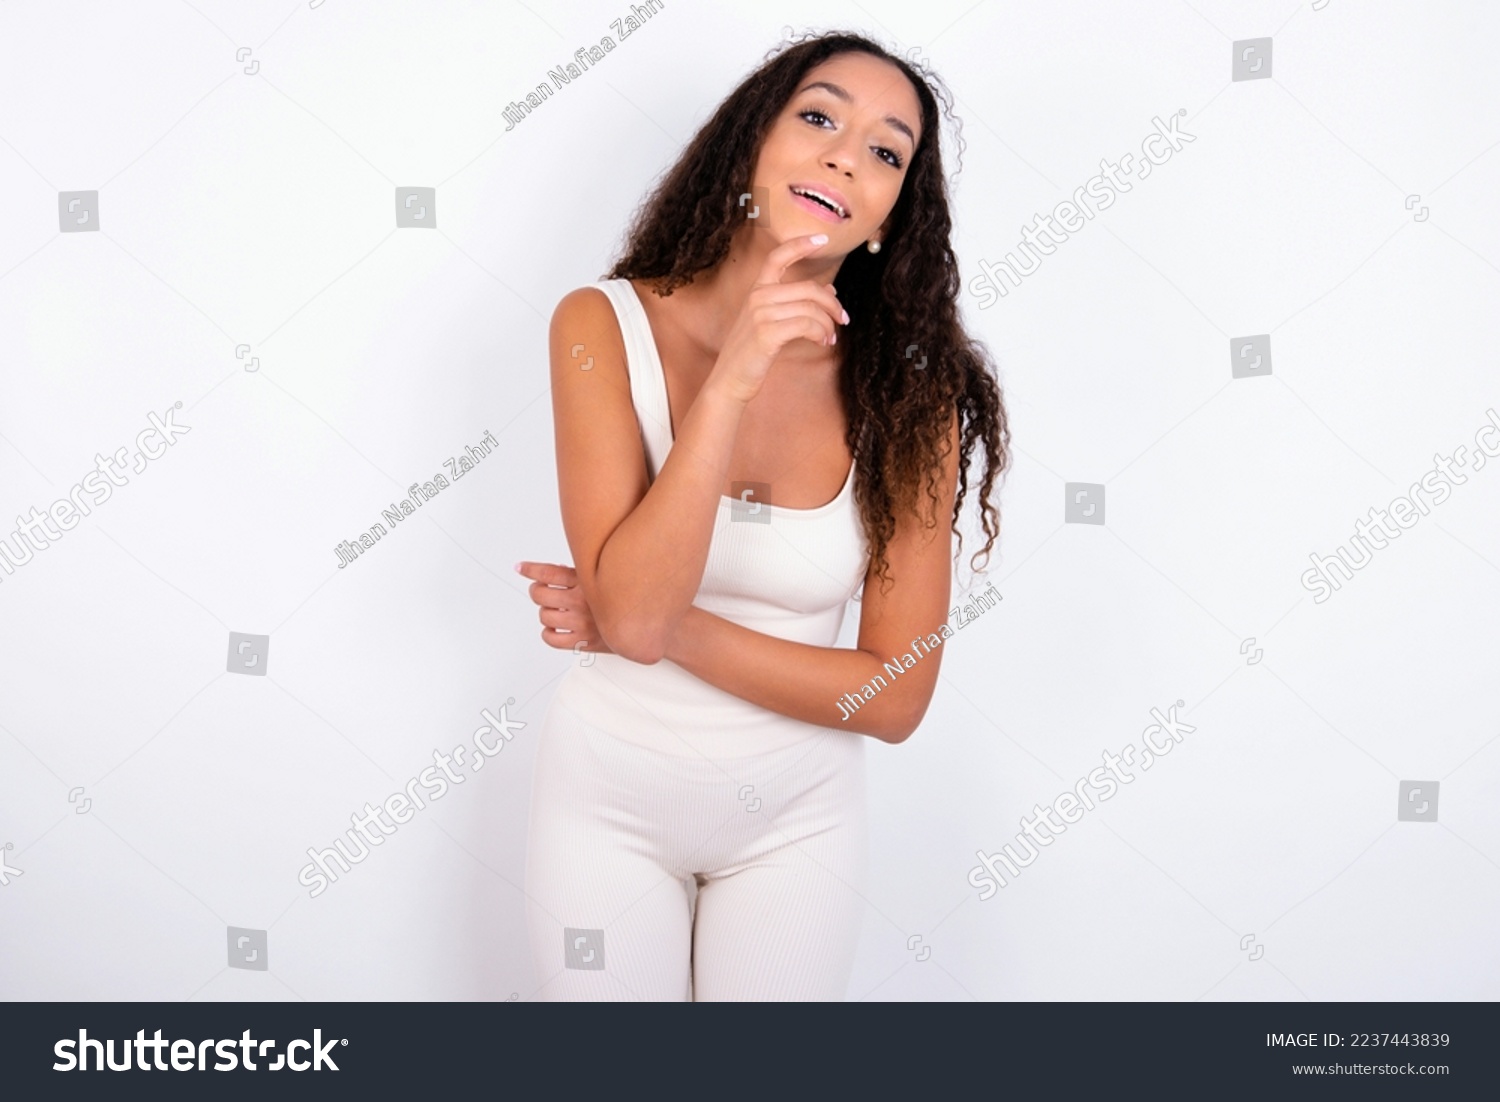 teen girl with curly hair wearing white sport set over white background laughs happily keeps hand on chin expresses positive emotions smiles broadly has carefree expression #2237443839